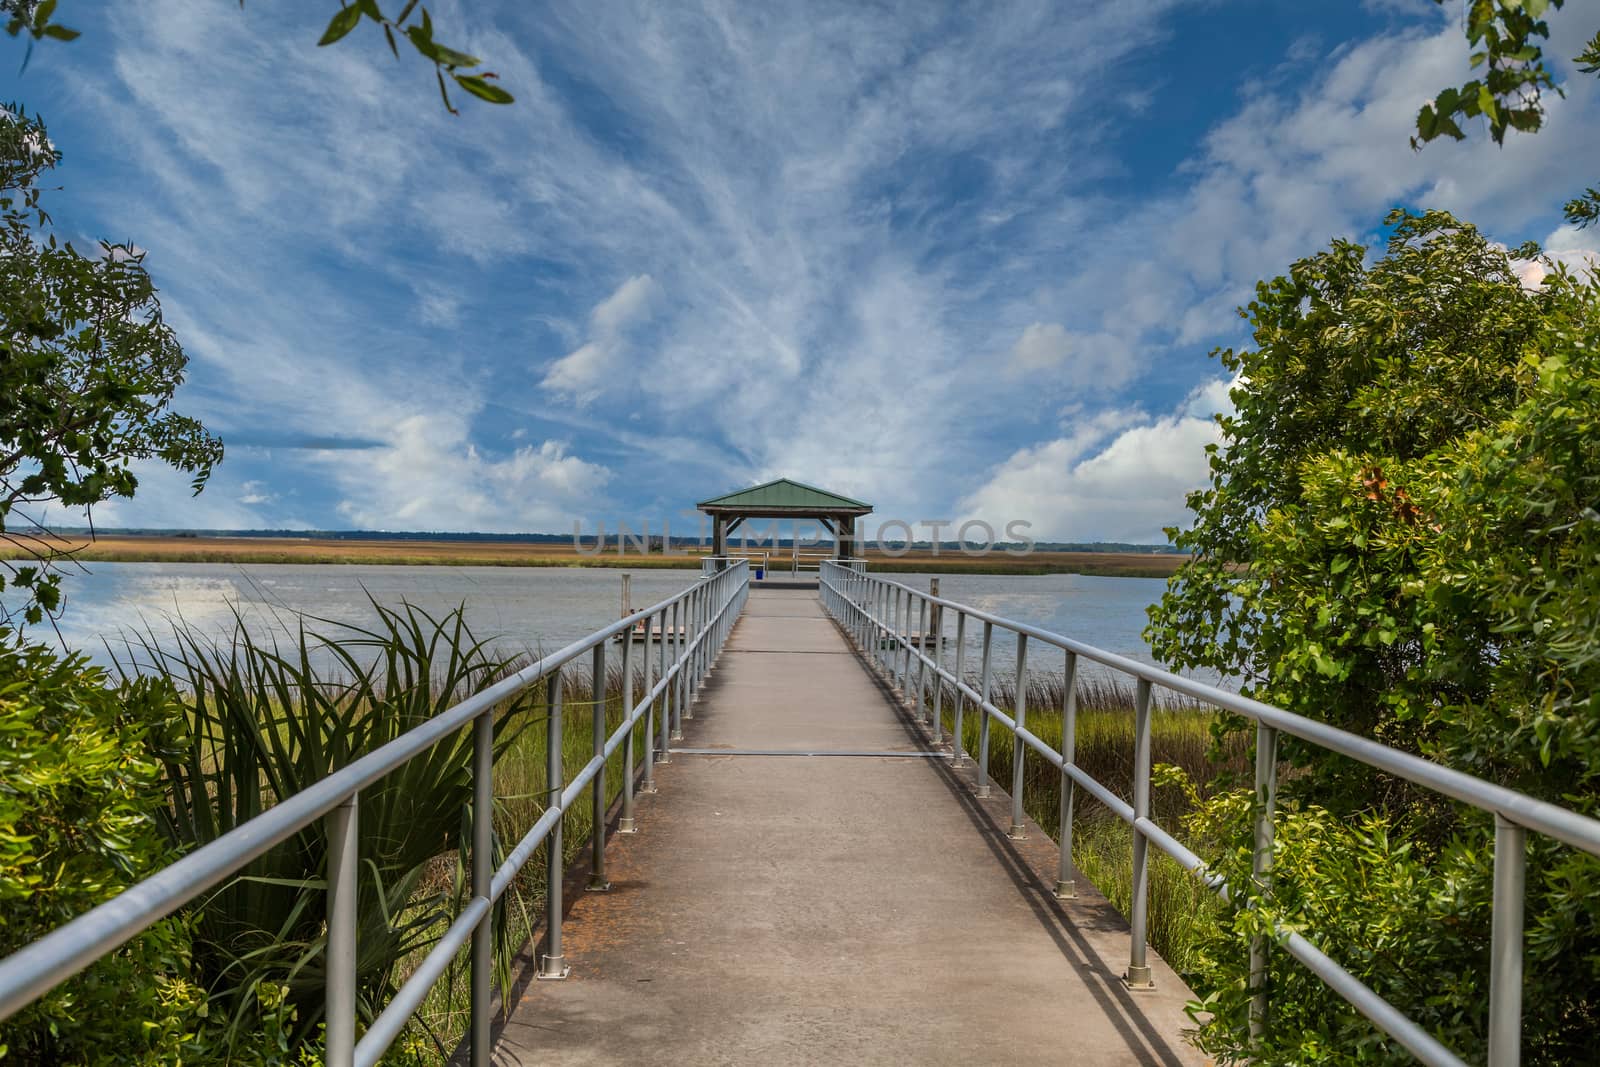 An empty fishing pier heading out into a saltland marsh